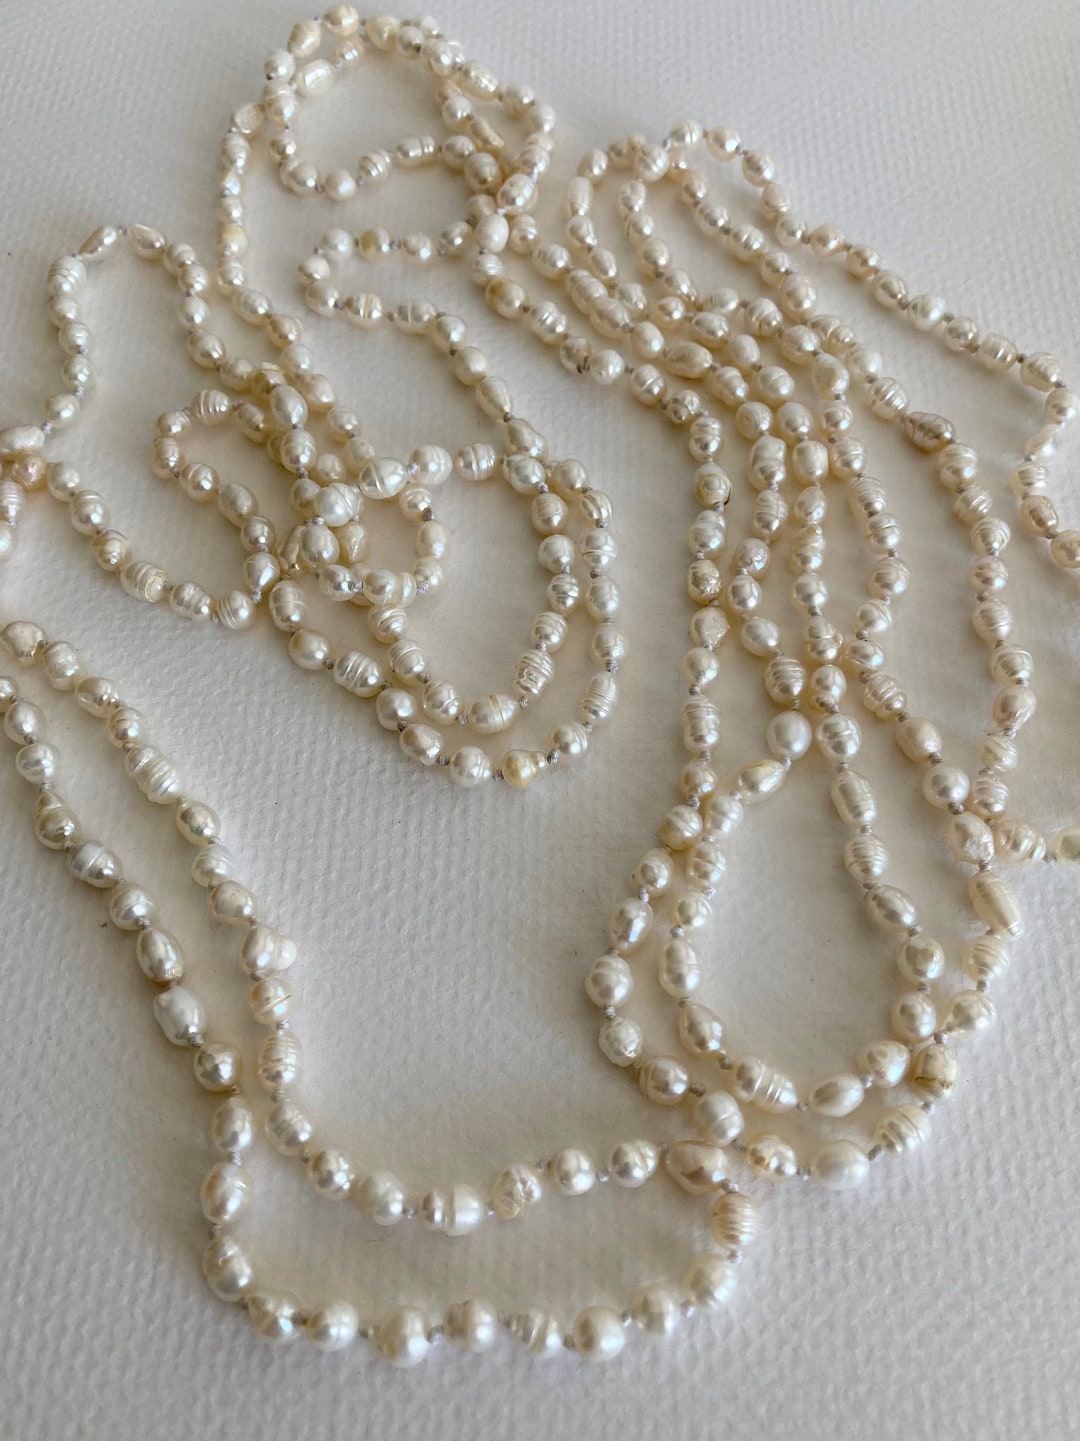 96 of Freshwater Pearls Strung and Knotted - Etsy